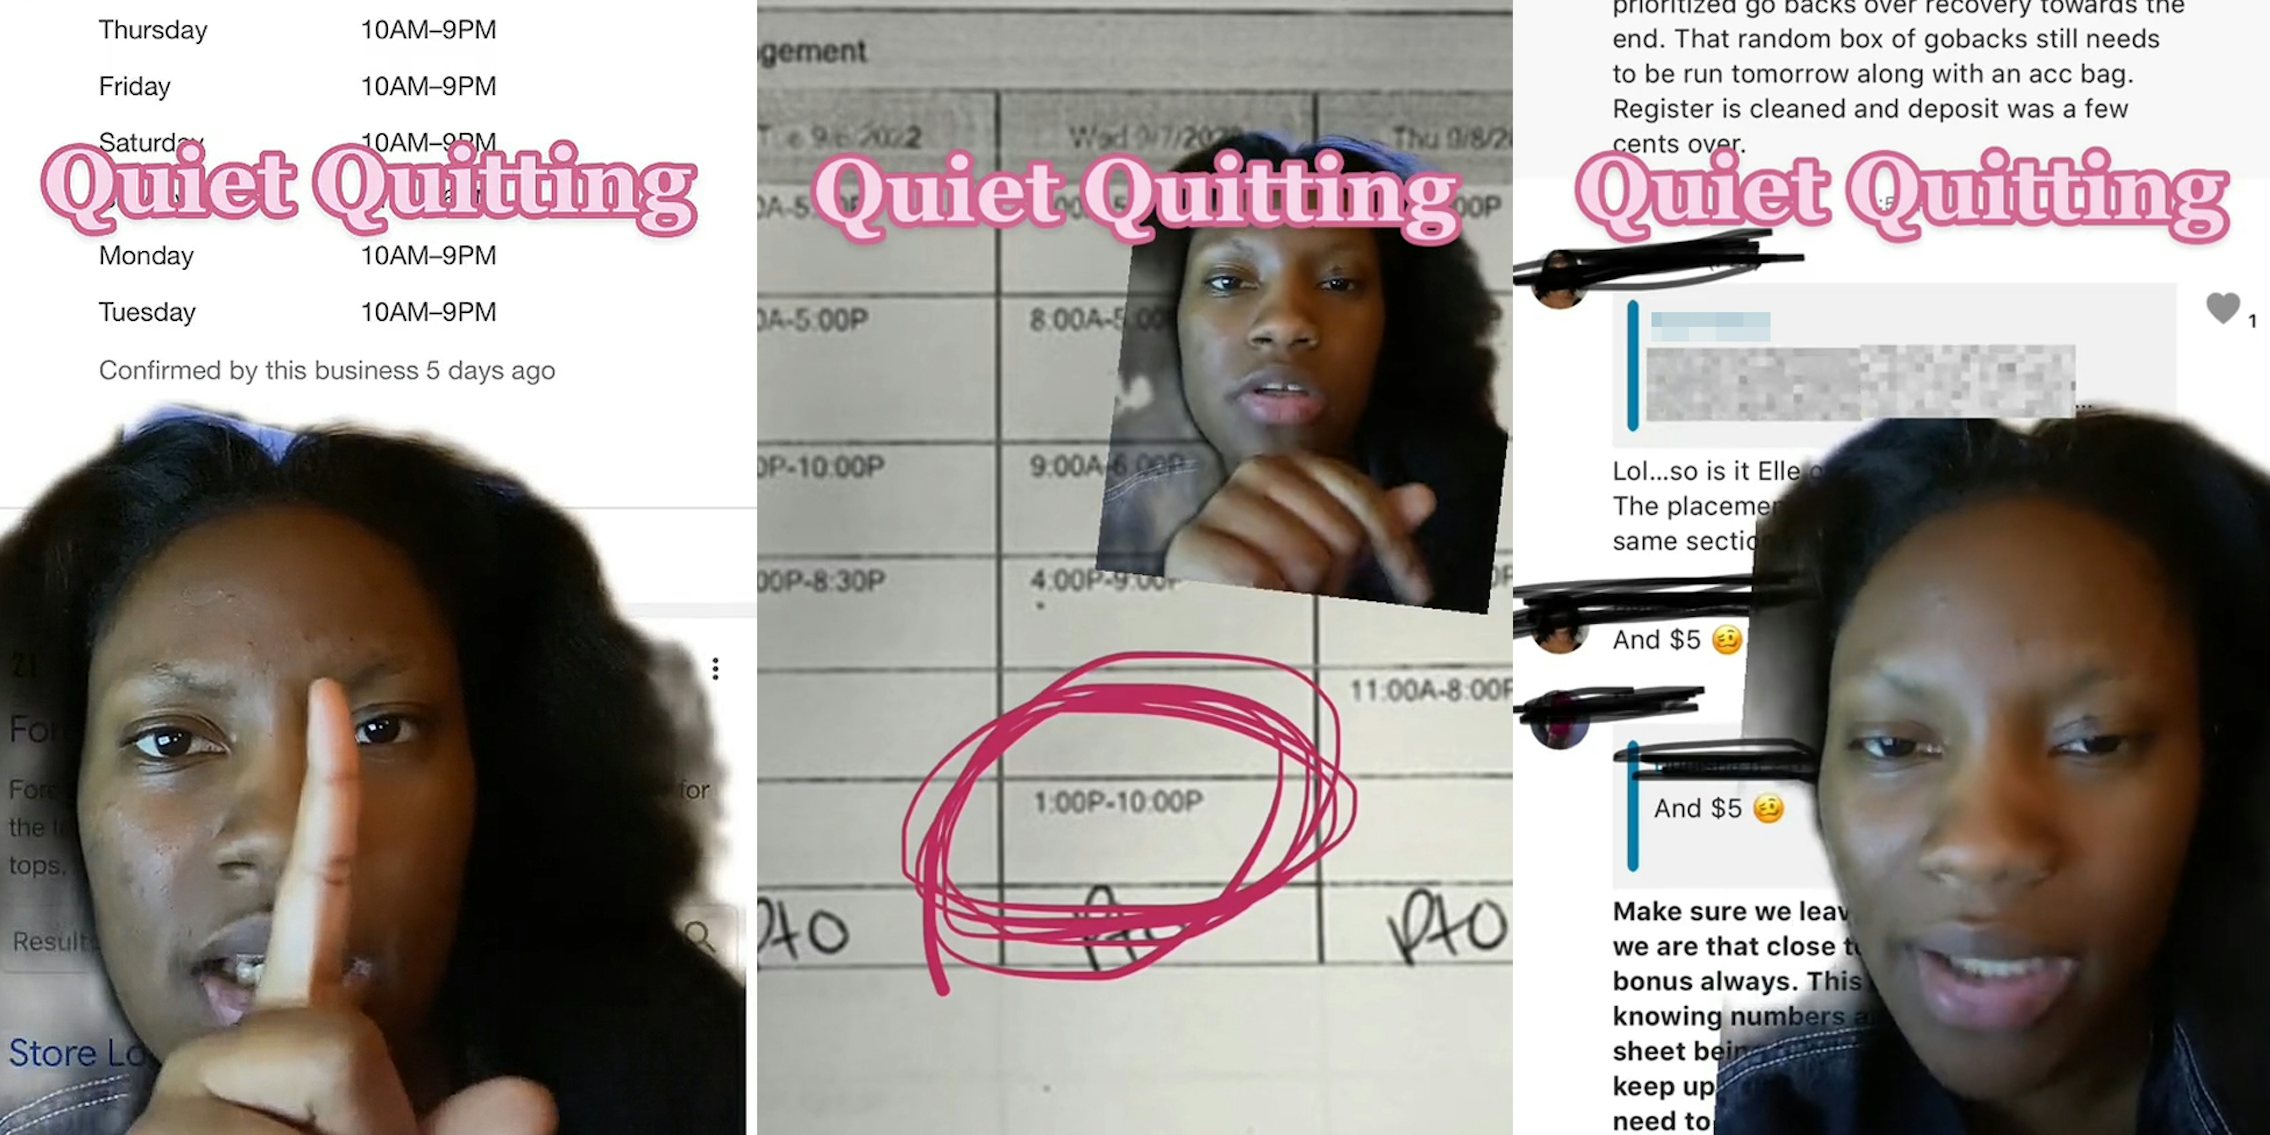 woman grenscreen TikiTok pointing finger up at caption 'Quiet Quitting' over her work schedule 'Thursday- Tuesday 10AM-9PM' (l) woman greenscreen TikTok pointing down over work schedule with red circle around '1:00P-10:00P' caption 'Quiet Quitting' (c) woman greenscreen TikTok over SnapChat group chat caption 'Quiet Quitting' 'That random box of gobacks still needs to be run tomorrow along with an acc bag. Register is cleaned and deposit was a few cents over. Lol... so is it Elle... The placement... same section... And $5... Make sure we leave... we are that close... bonus always. This... knowing numbers...' (r)